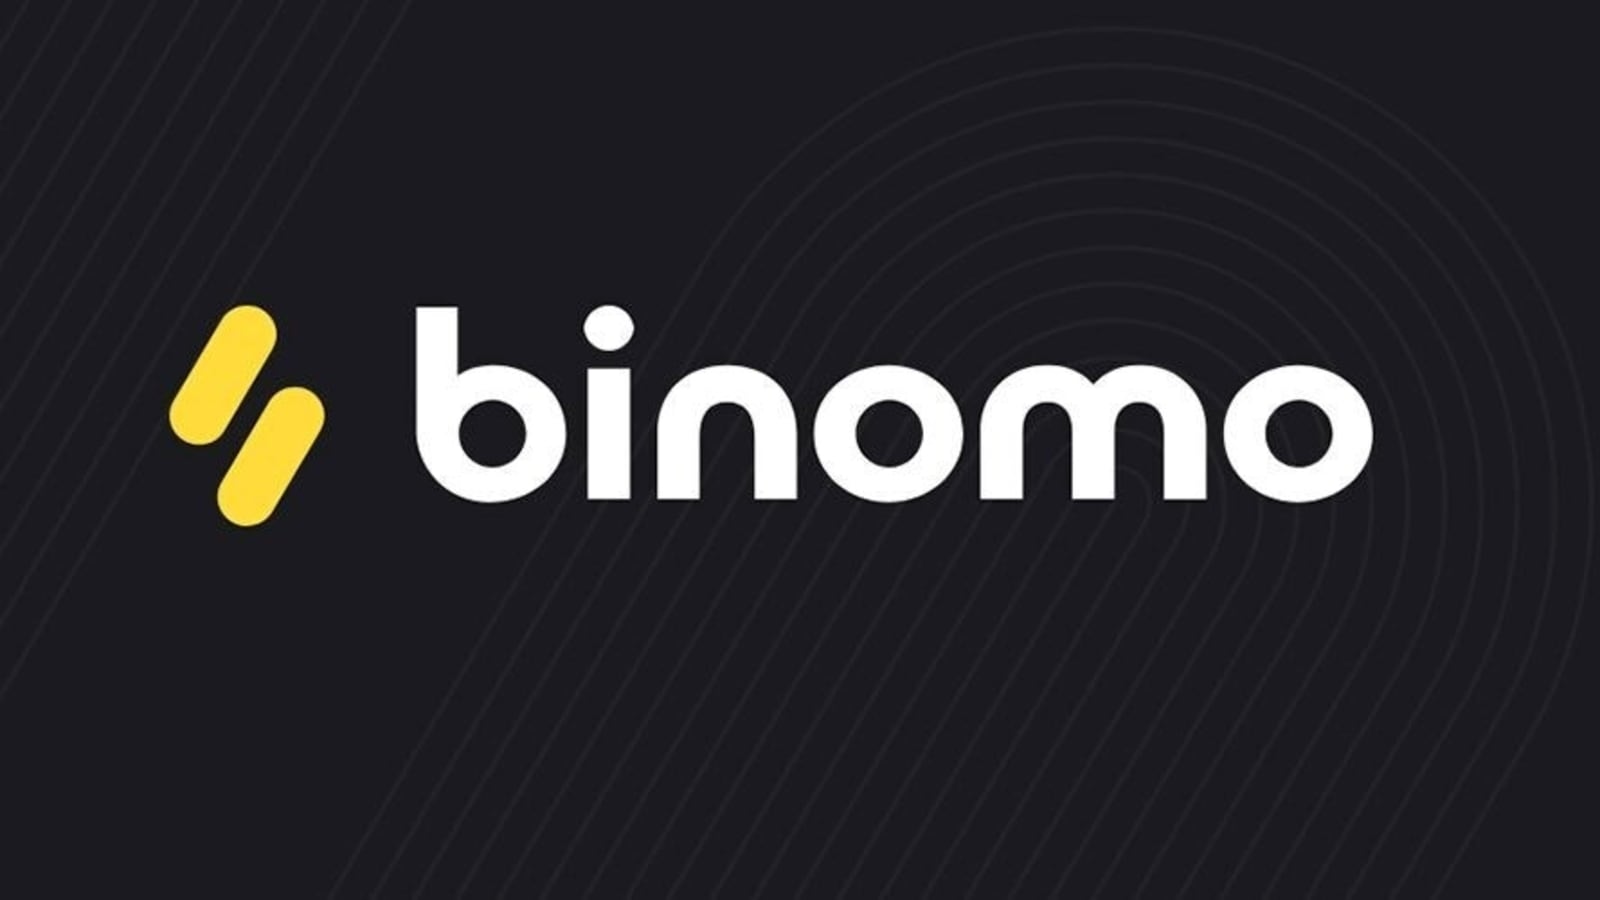 Binomo platform review for PC and mobile apps in India - Hindustan Times